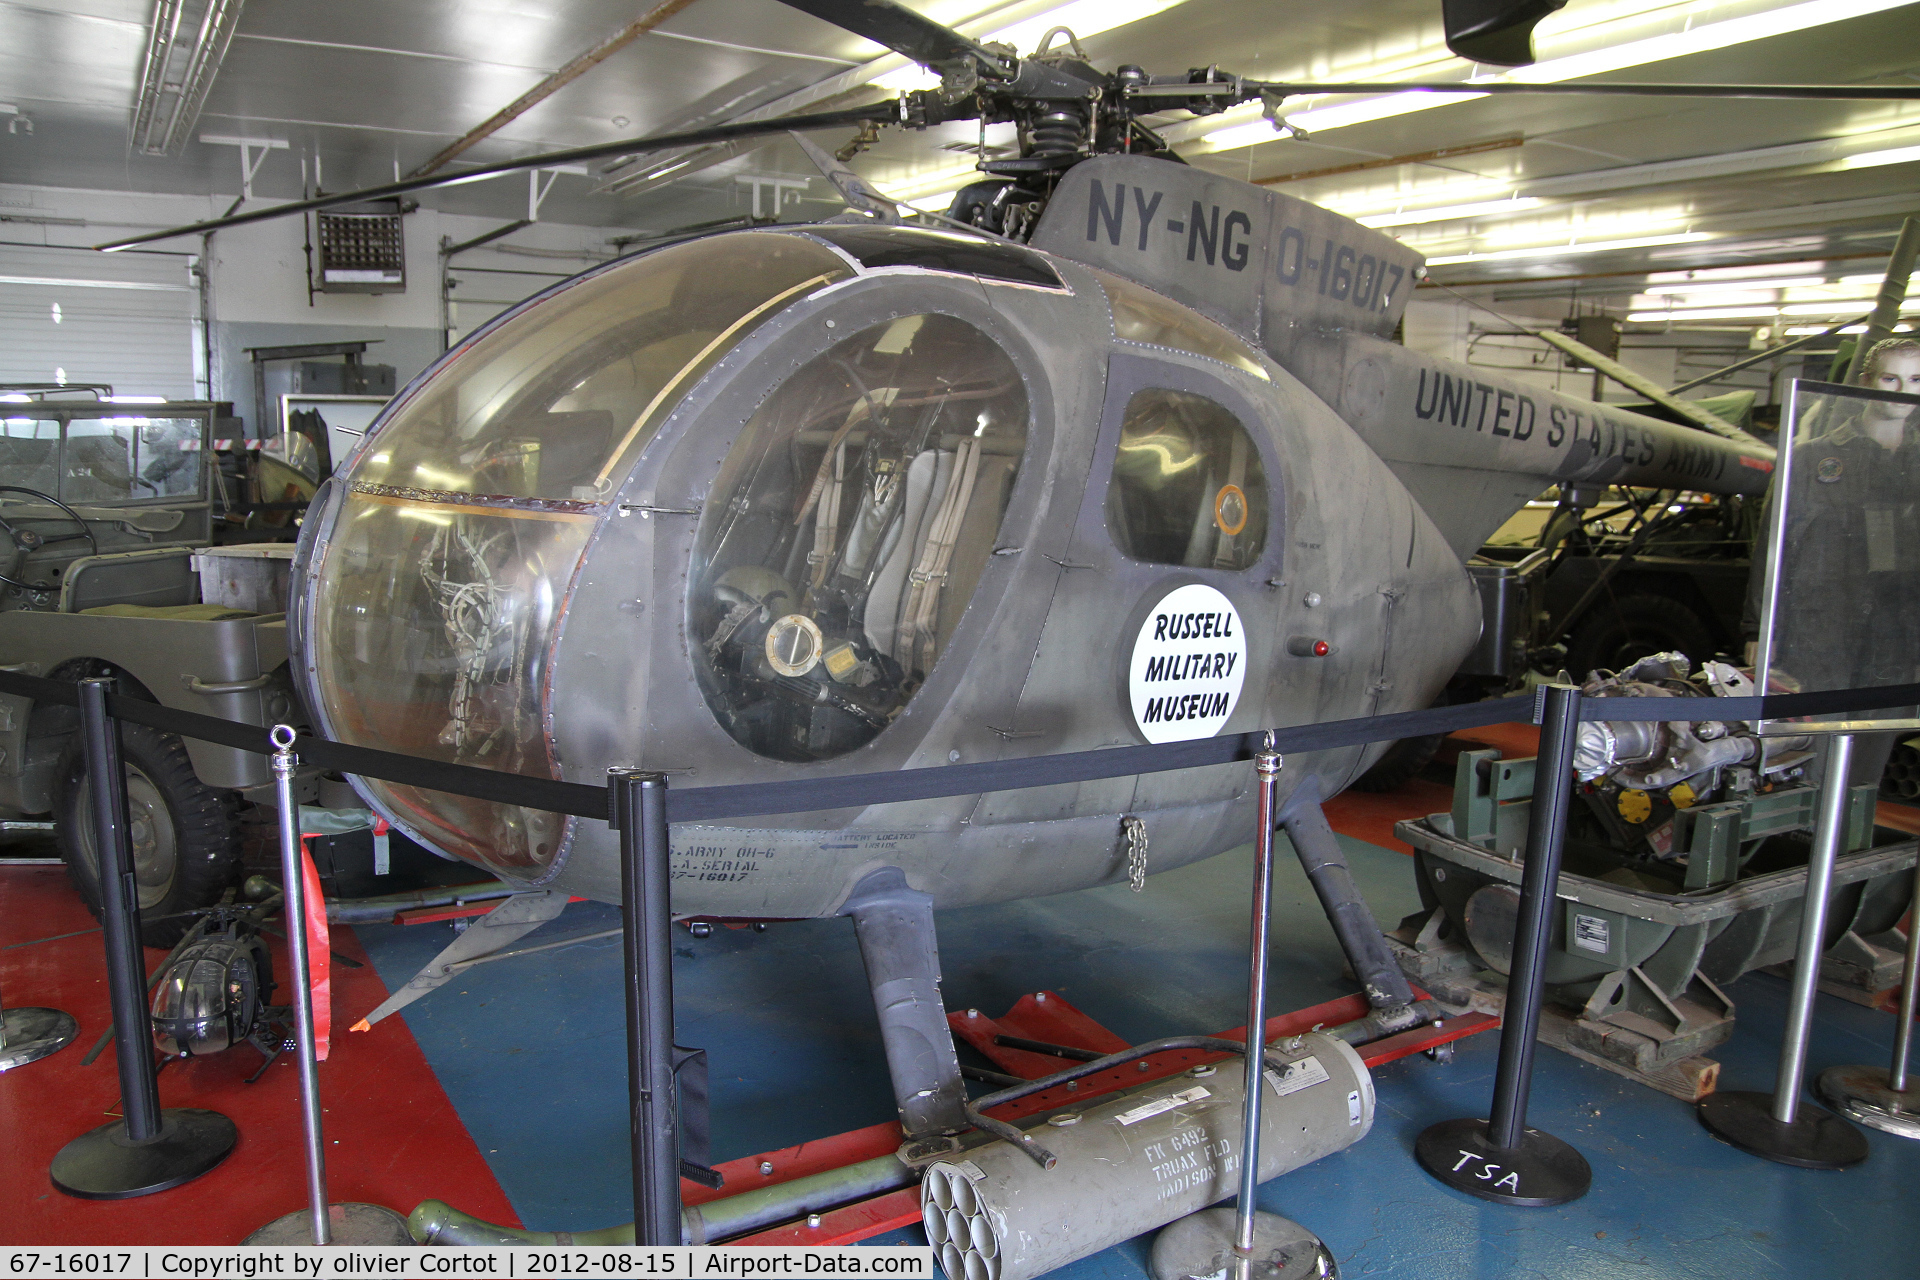 67-16017, 1967 Hughes OH-6A Cayuse C/N 0402, in the little hangar of the russel museum